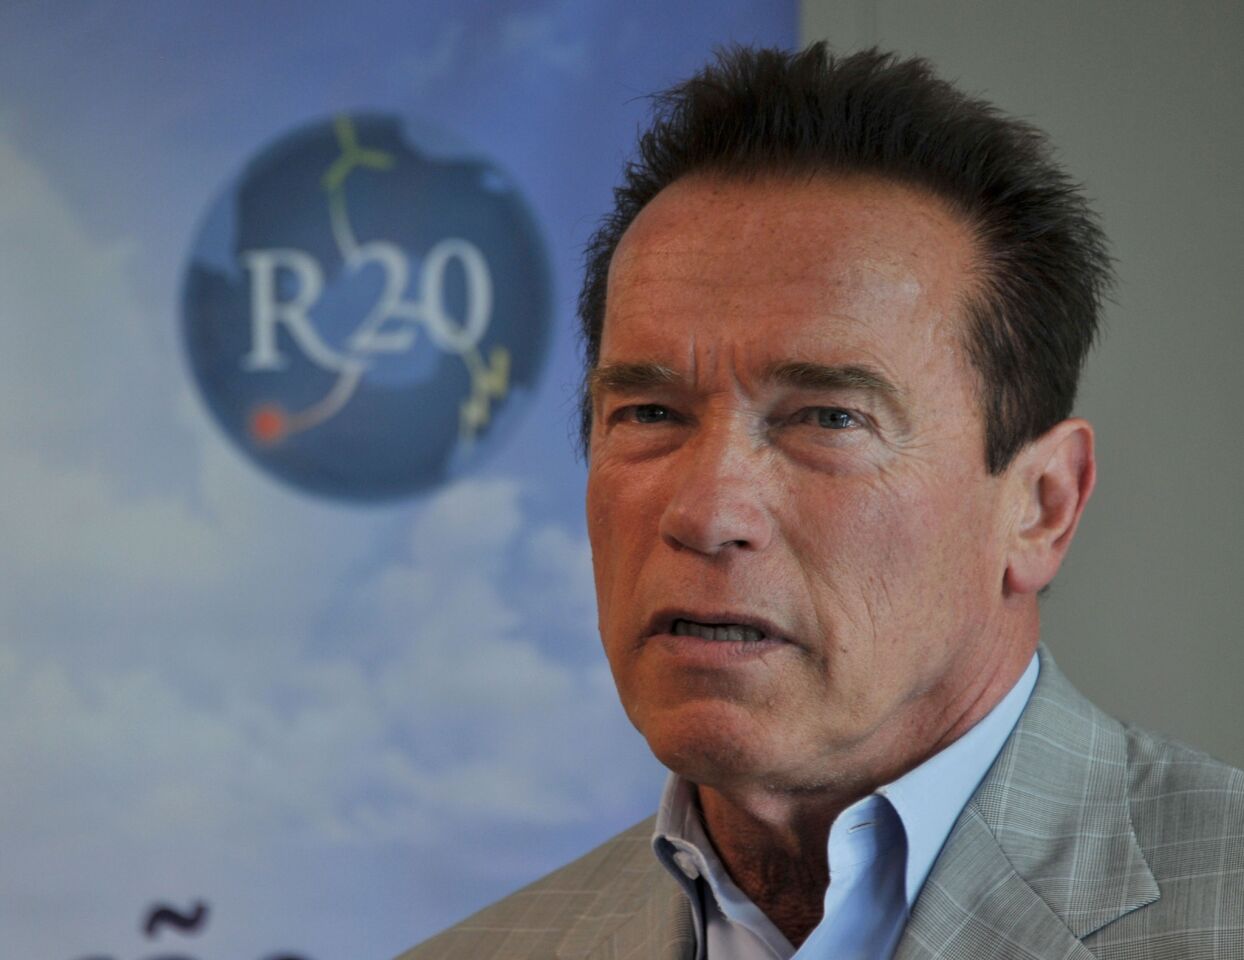 Former California Gov. Arnold Schwarzenegger's affair with the family maid, Mildred Baena, which produced a son, apparently convinced his wife Maria Shriver that perhaps those L.A. Times stories about her philandering husband weren't dirty politics after all, and she divorced him. Since then, everyone has moved on. Arnie says he continues to support his son and Baena financially. He's trying to revive his Hollywood career. Shriver has returned to NBC as as a special anchor focusing on women's issues.